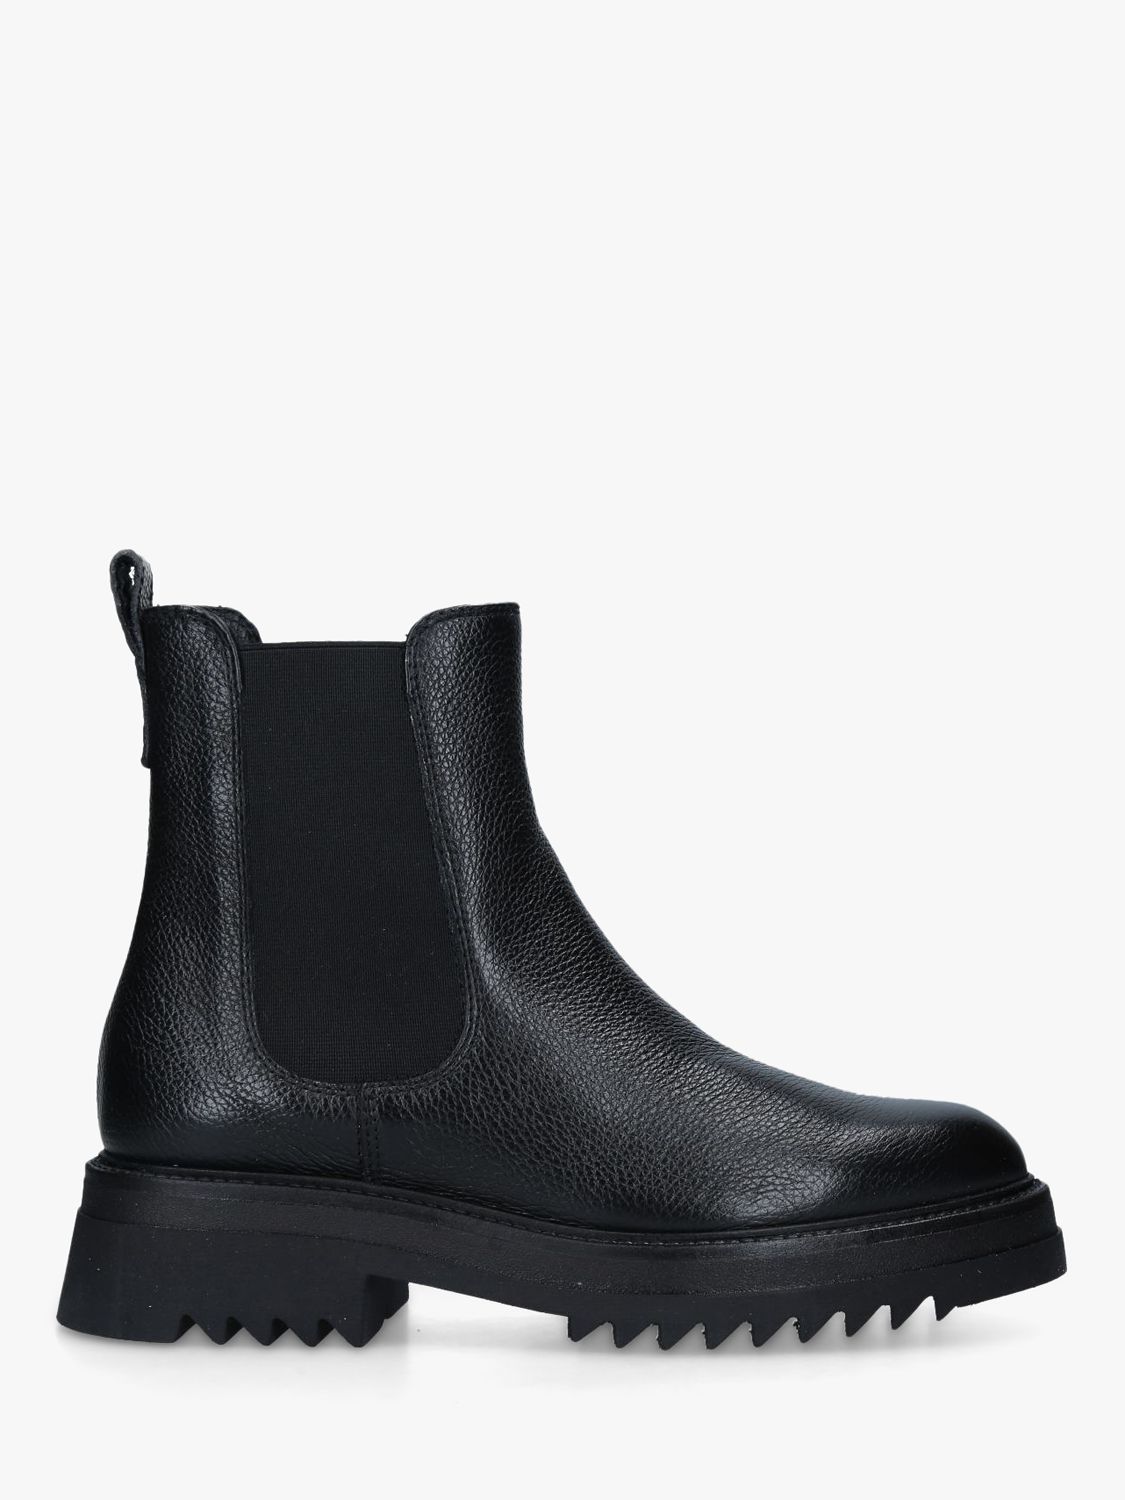 Carvela Strong Leather Chunky Sole Chelsea Boots, Black at John Lewis ...